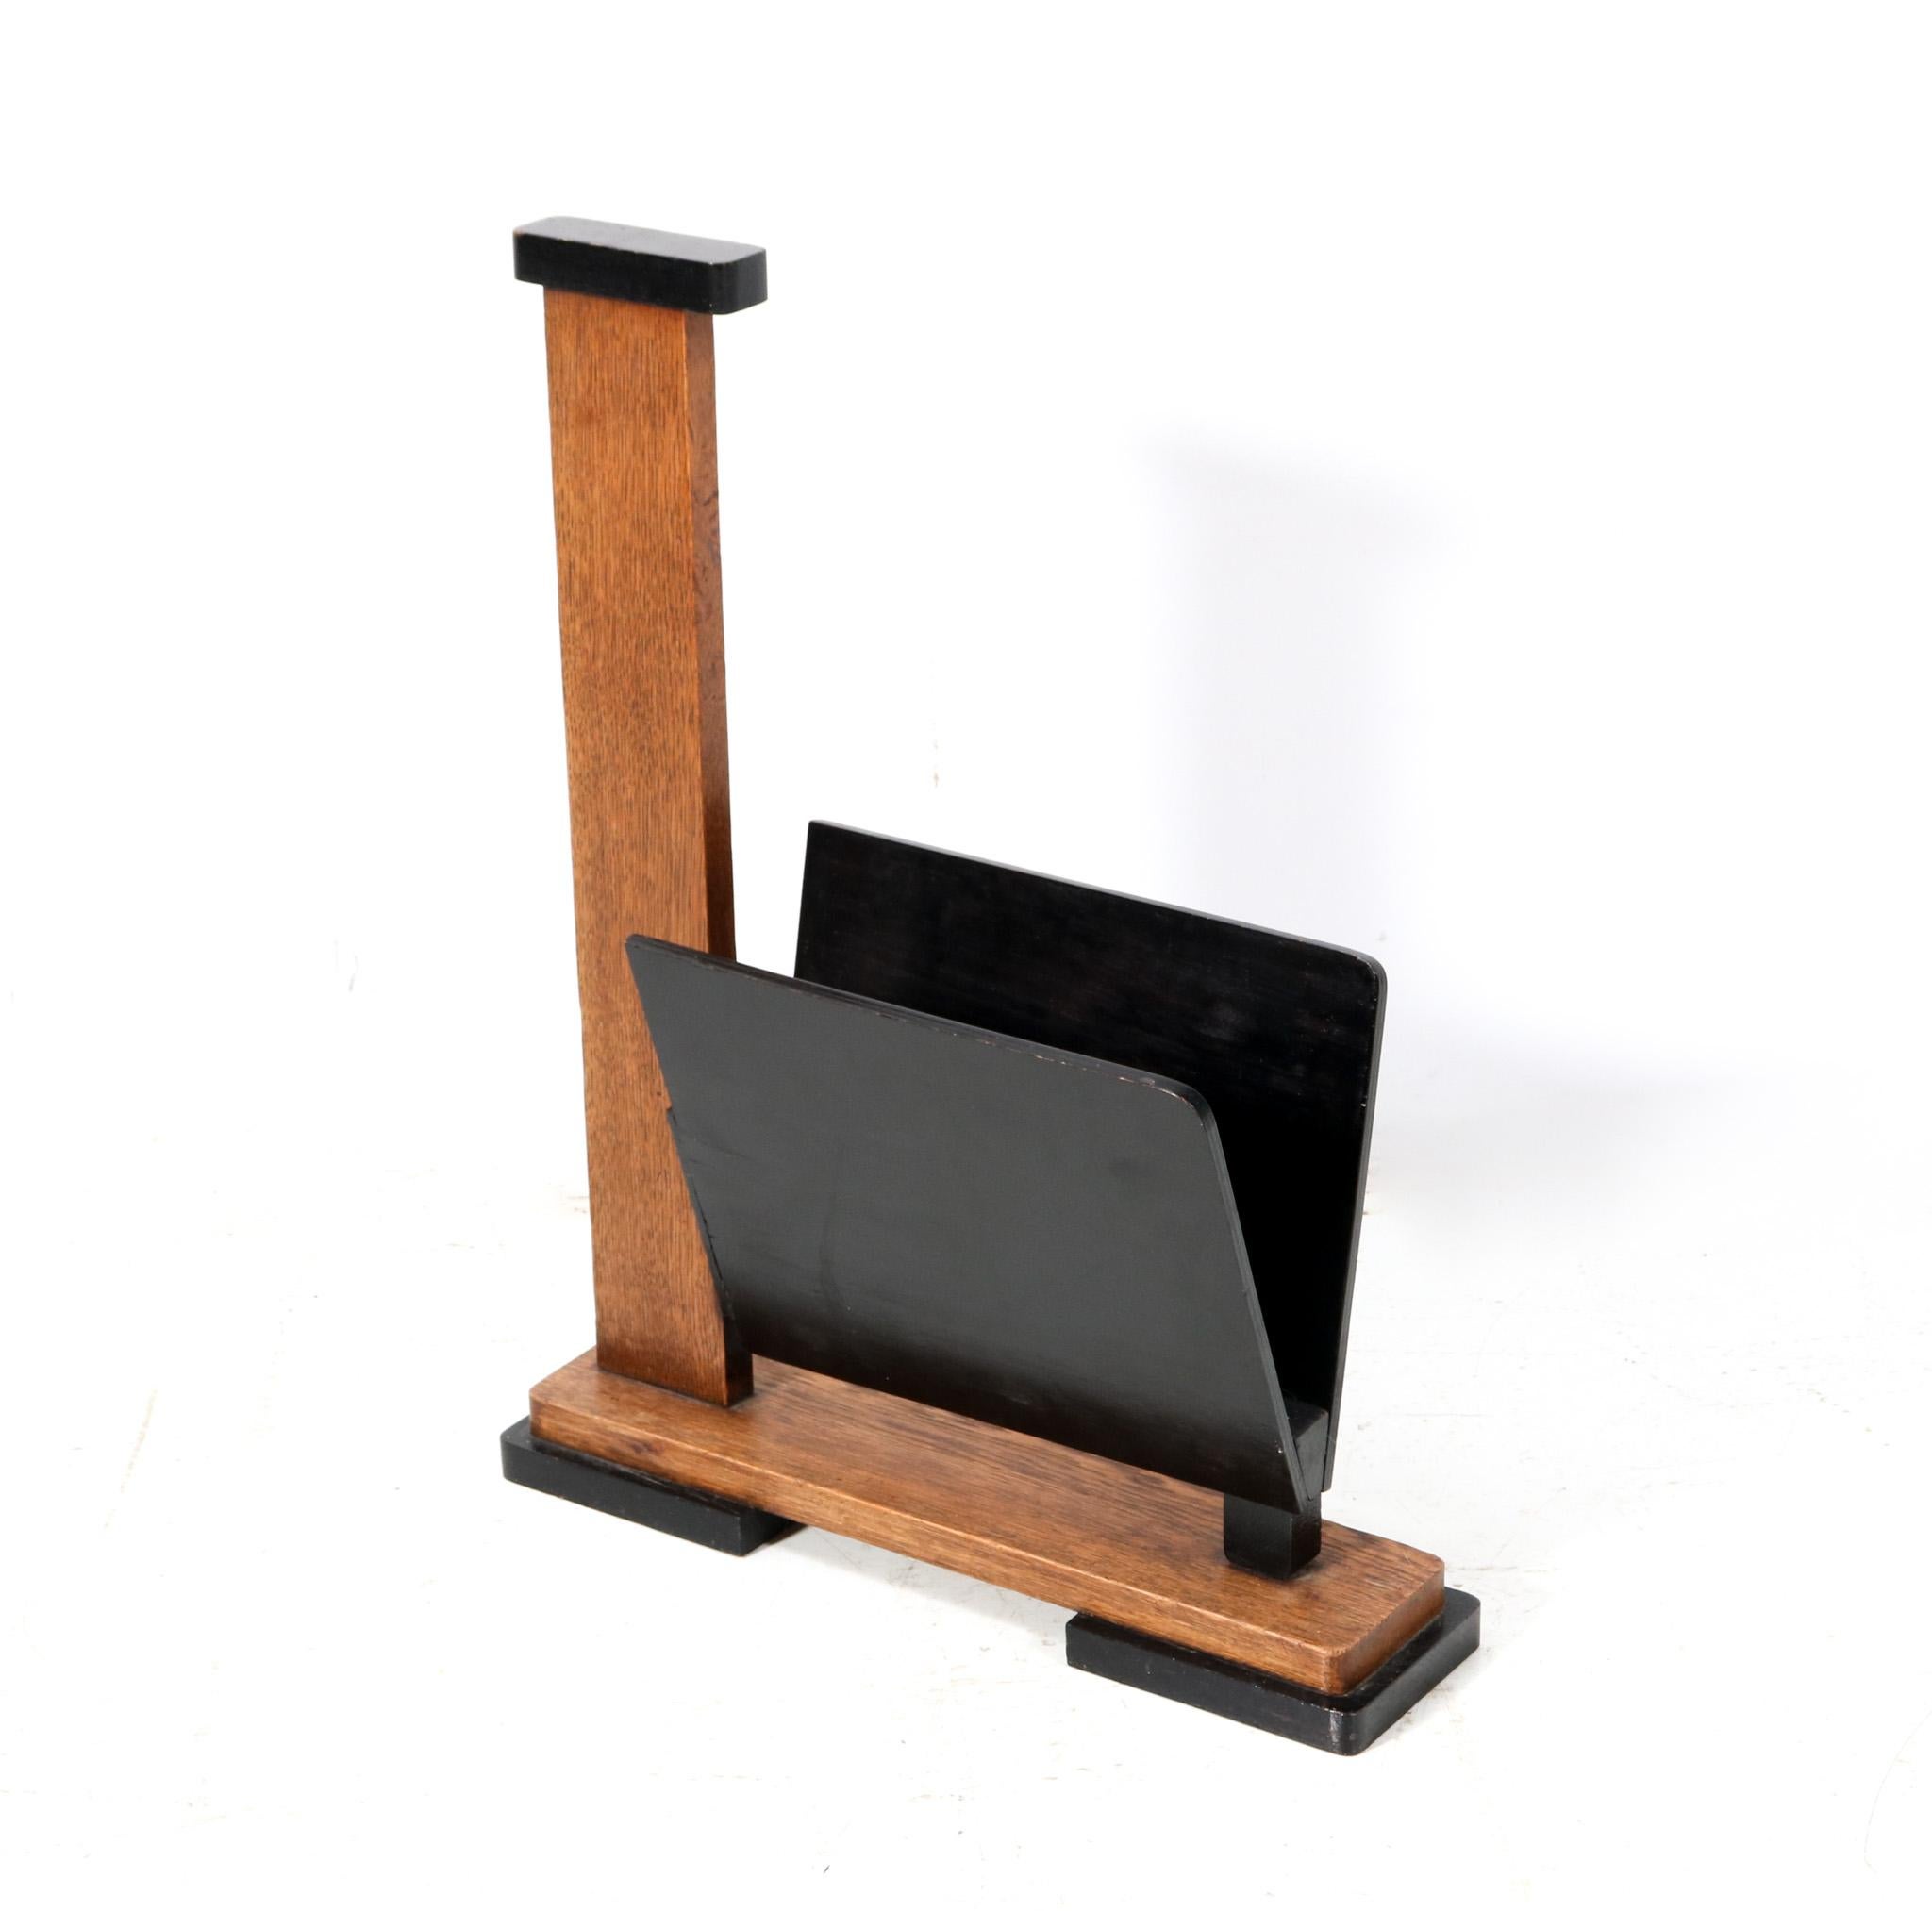 Stunning and rare Art Deco Modernist magazine rack.
Striking Dutch design from the 1920s.
Solid oak with original black lacquered elements.
This wonderful Art Deco Modernist magazine rack is in very good condition with minor wear consistent with age